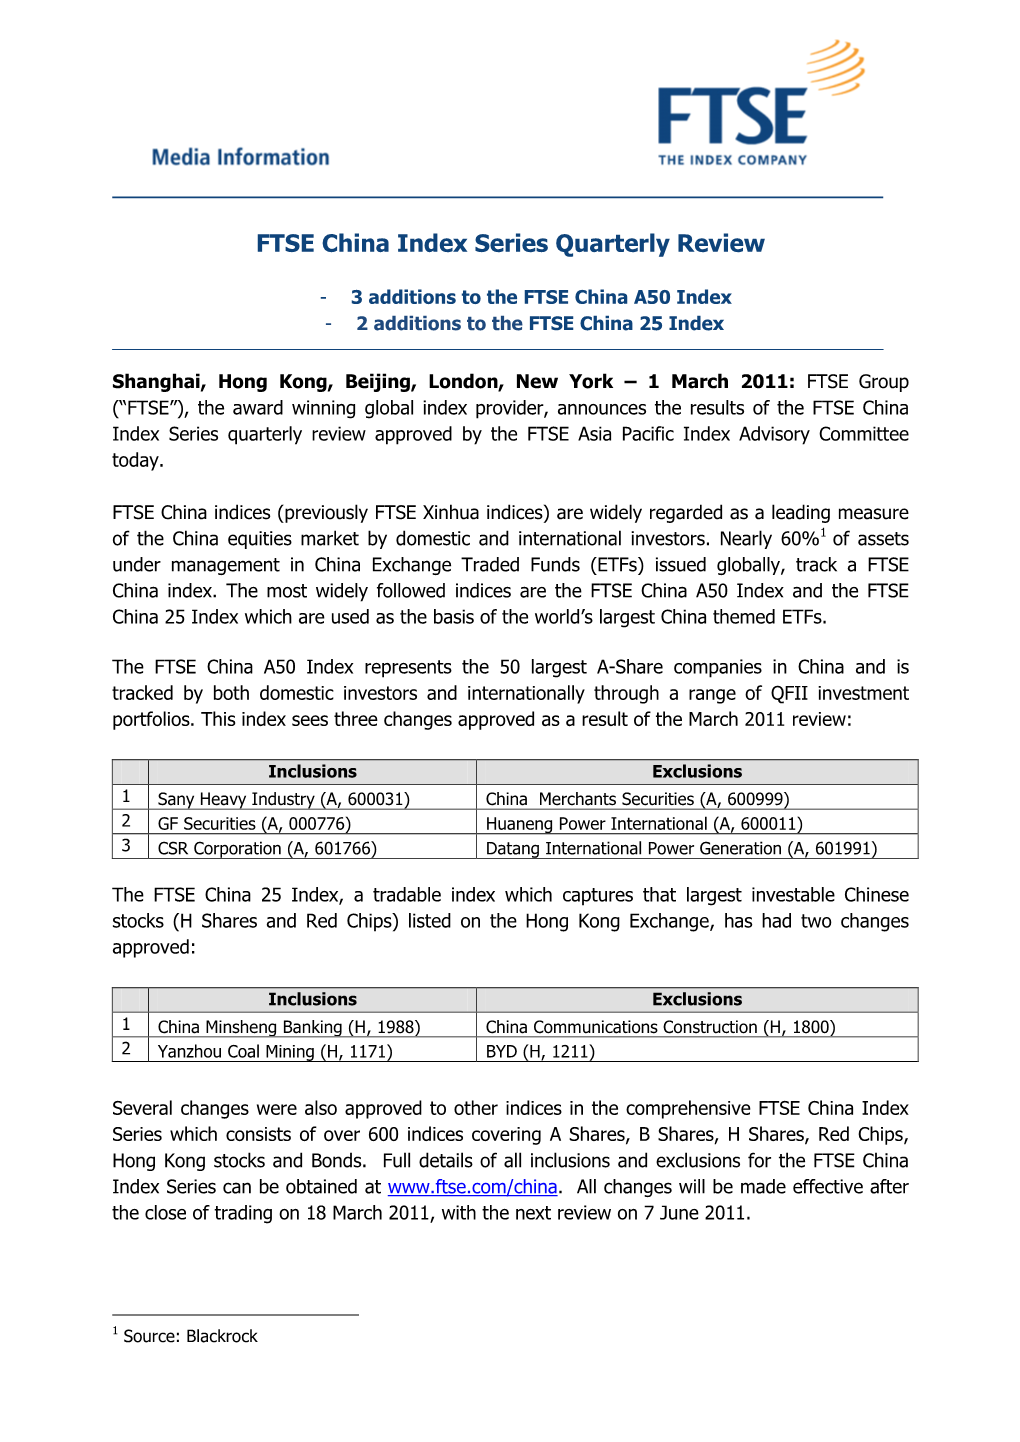 FTSE China Index Series Quarterly Review